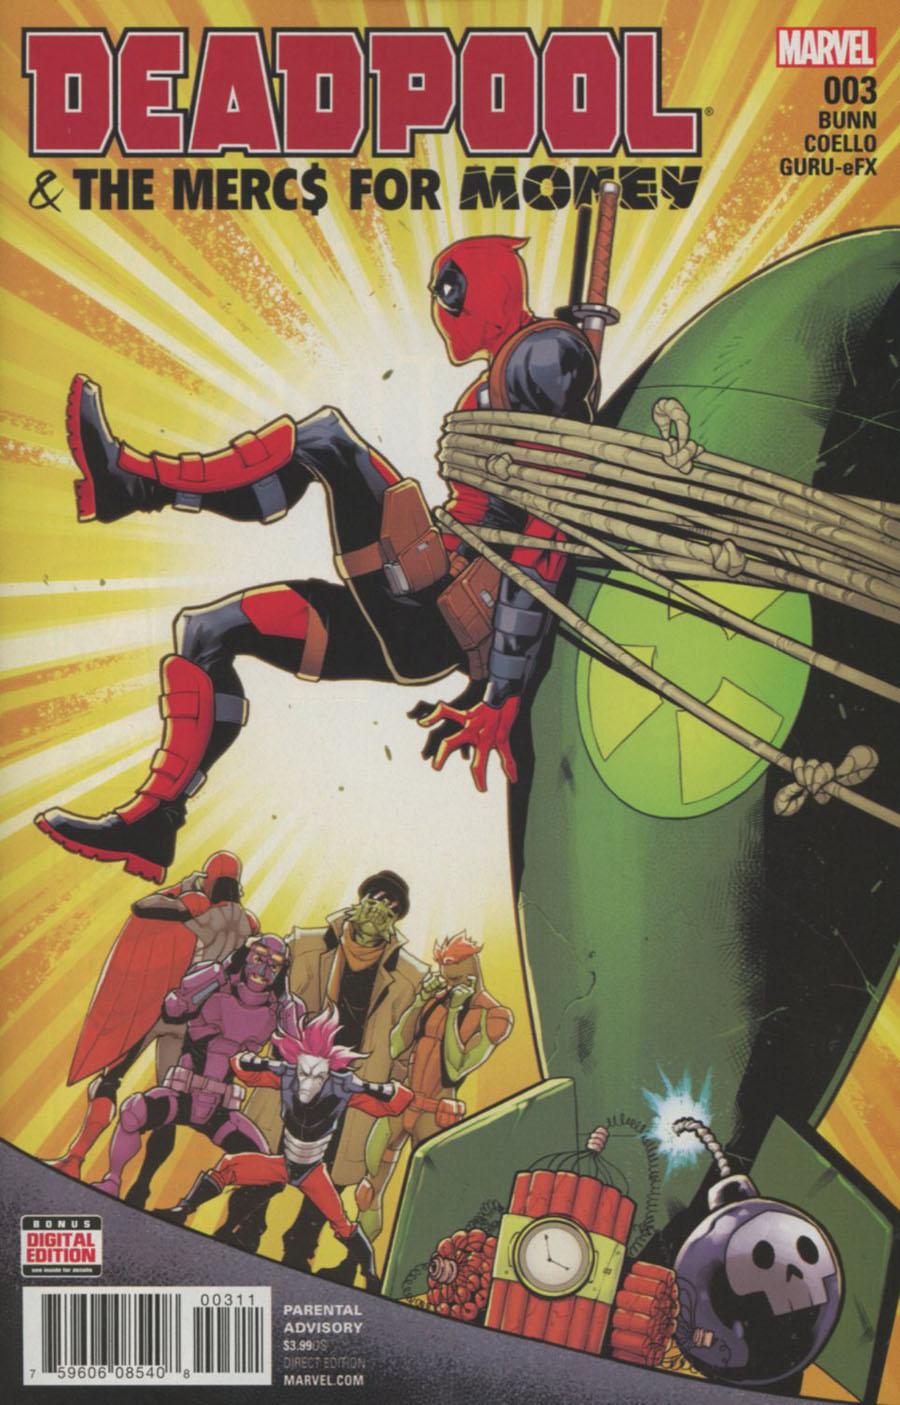 Deadpool And The Mercs For Money Vol. 2 #3